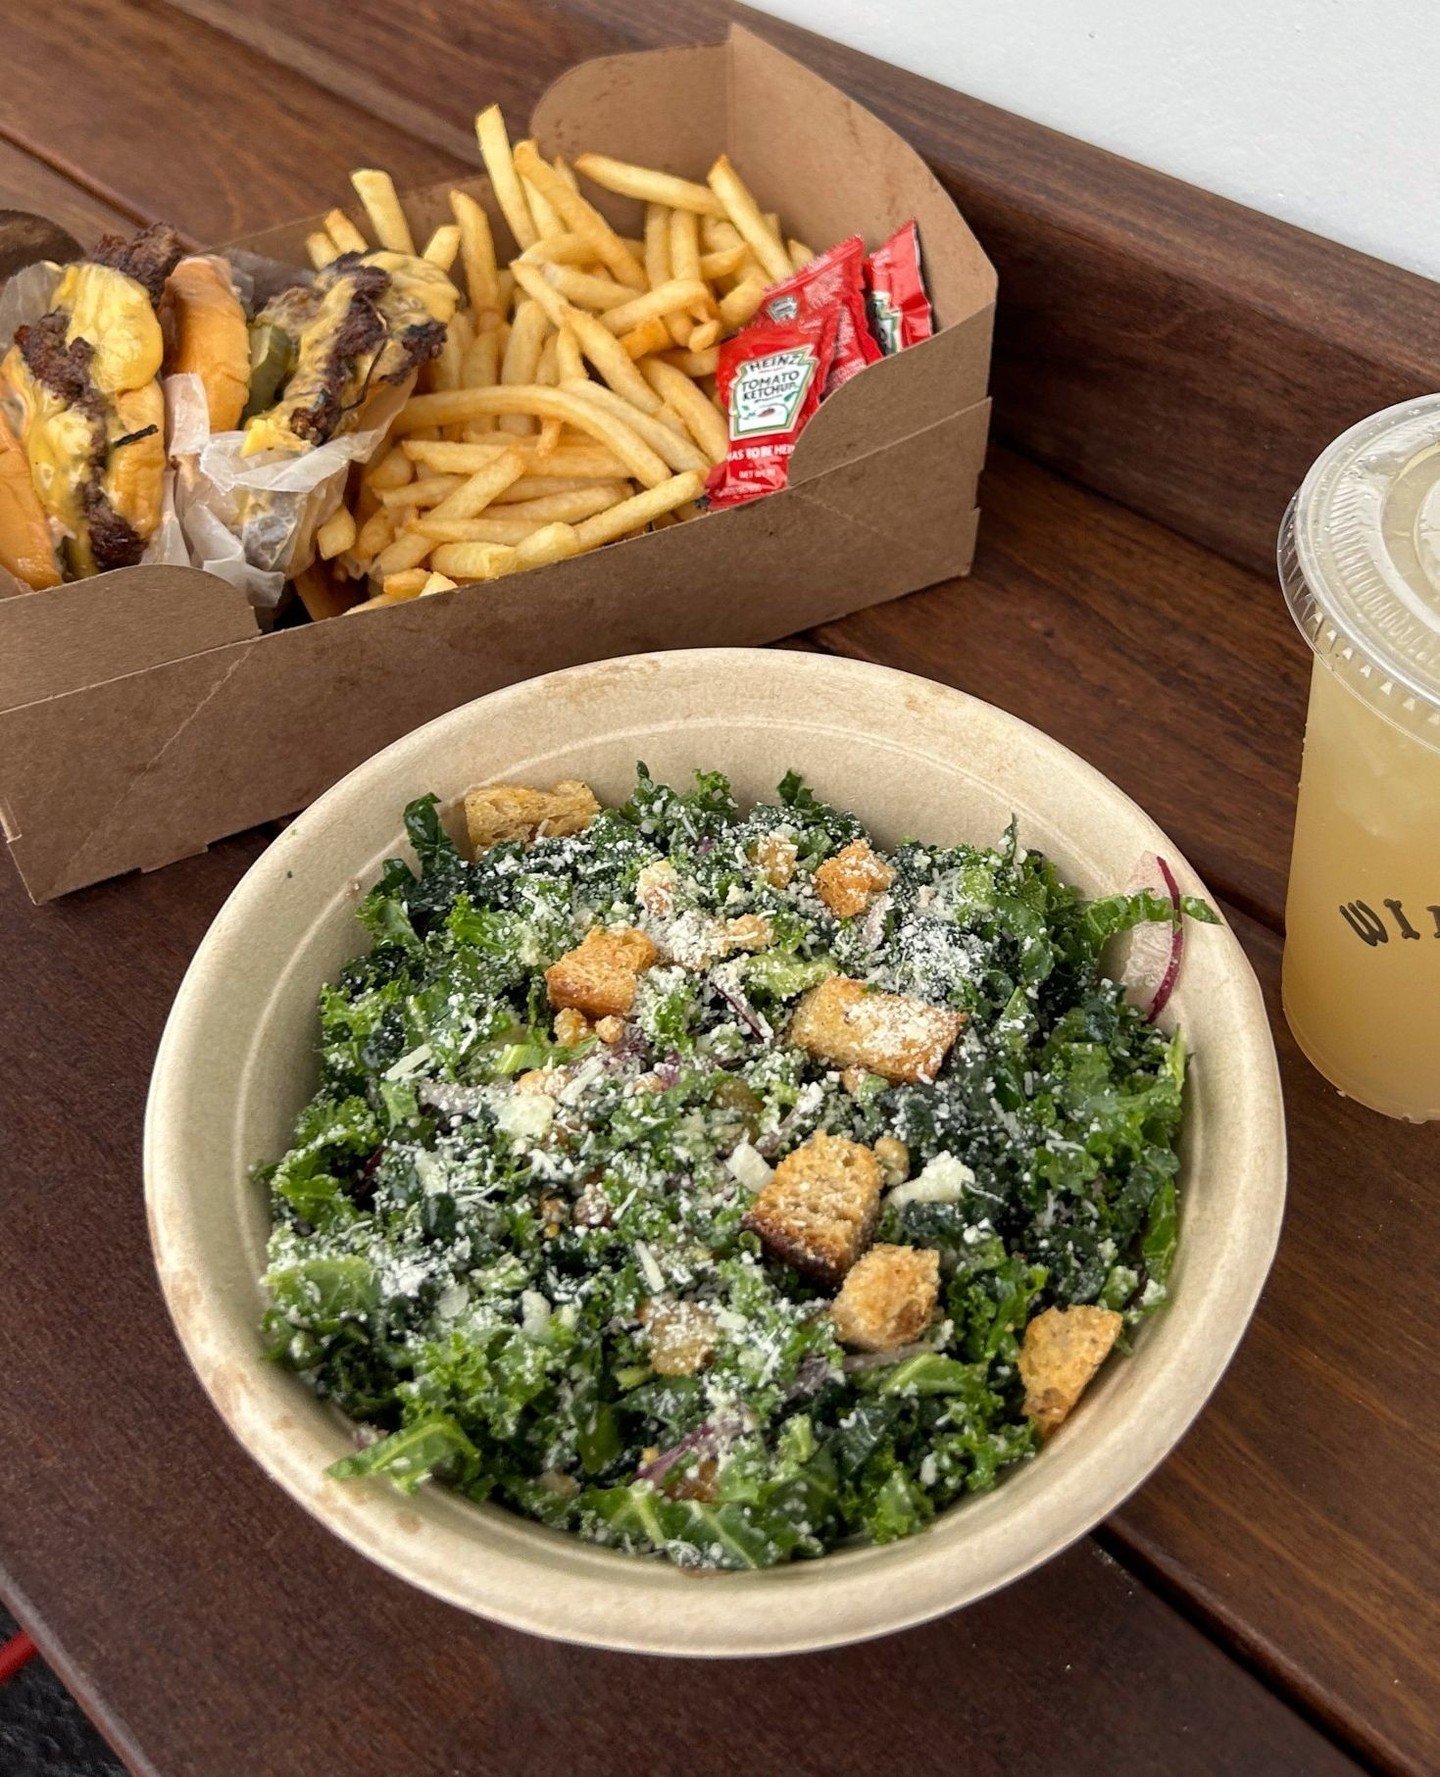 FRONT AND CENTER ~ the kale salad is a classic 🥗 ⁠
#thewindowla #kalesalad #eatyourveggies⁠
⁠